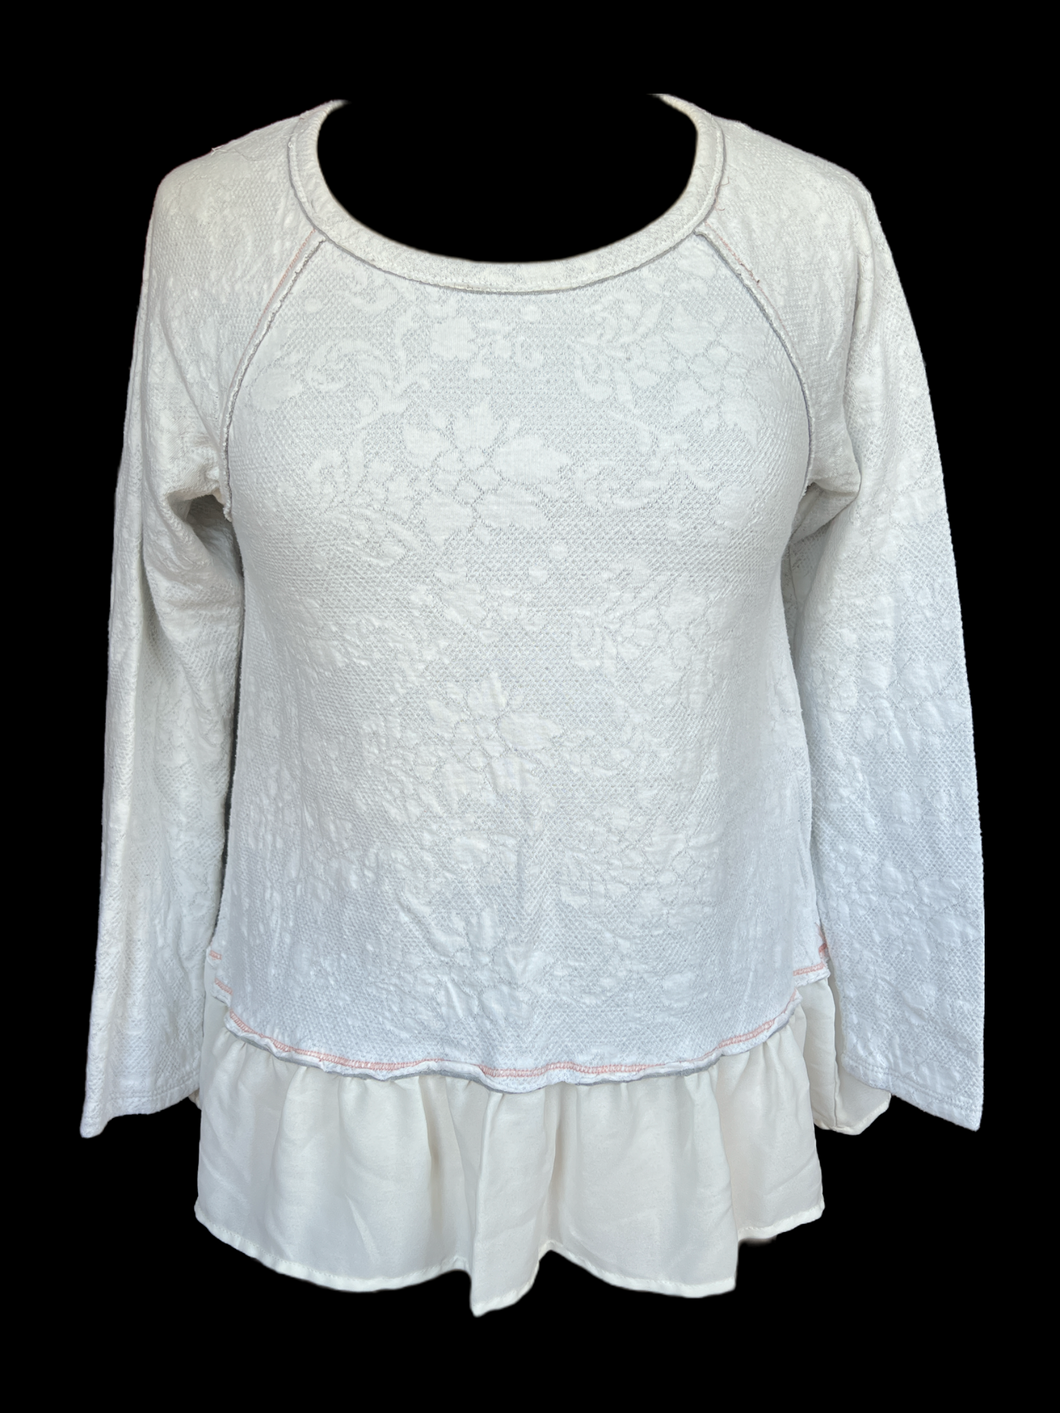 M Vintage white soft lacey sweater top w/ mesh bottom